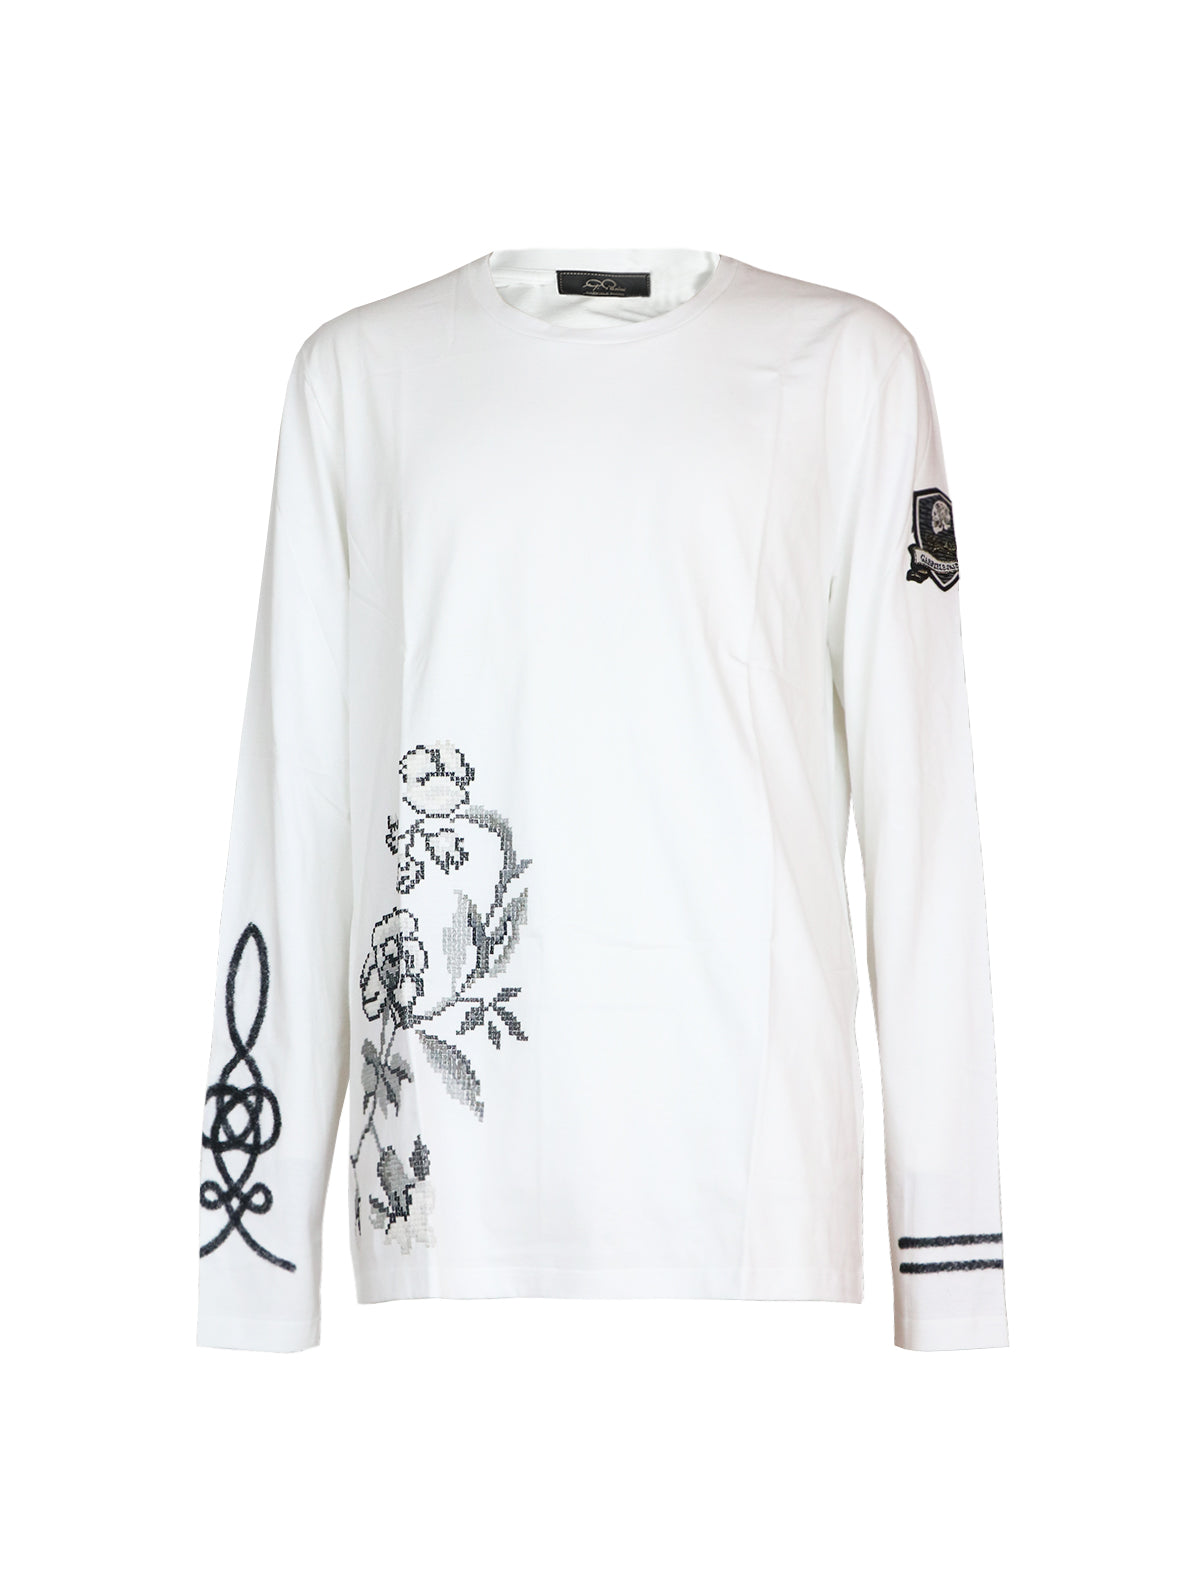 Gabriele Pasini Long-Sleeved Sweatshirt with Floral Print in White